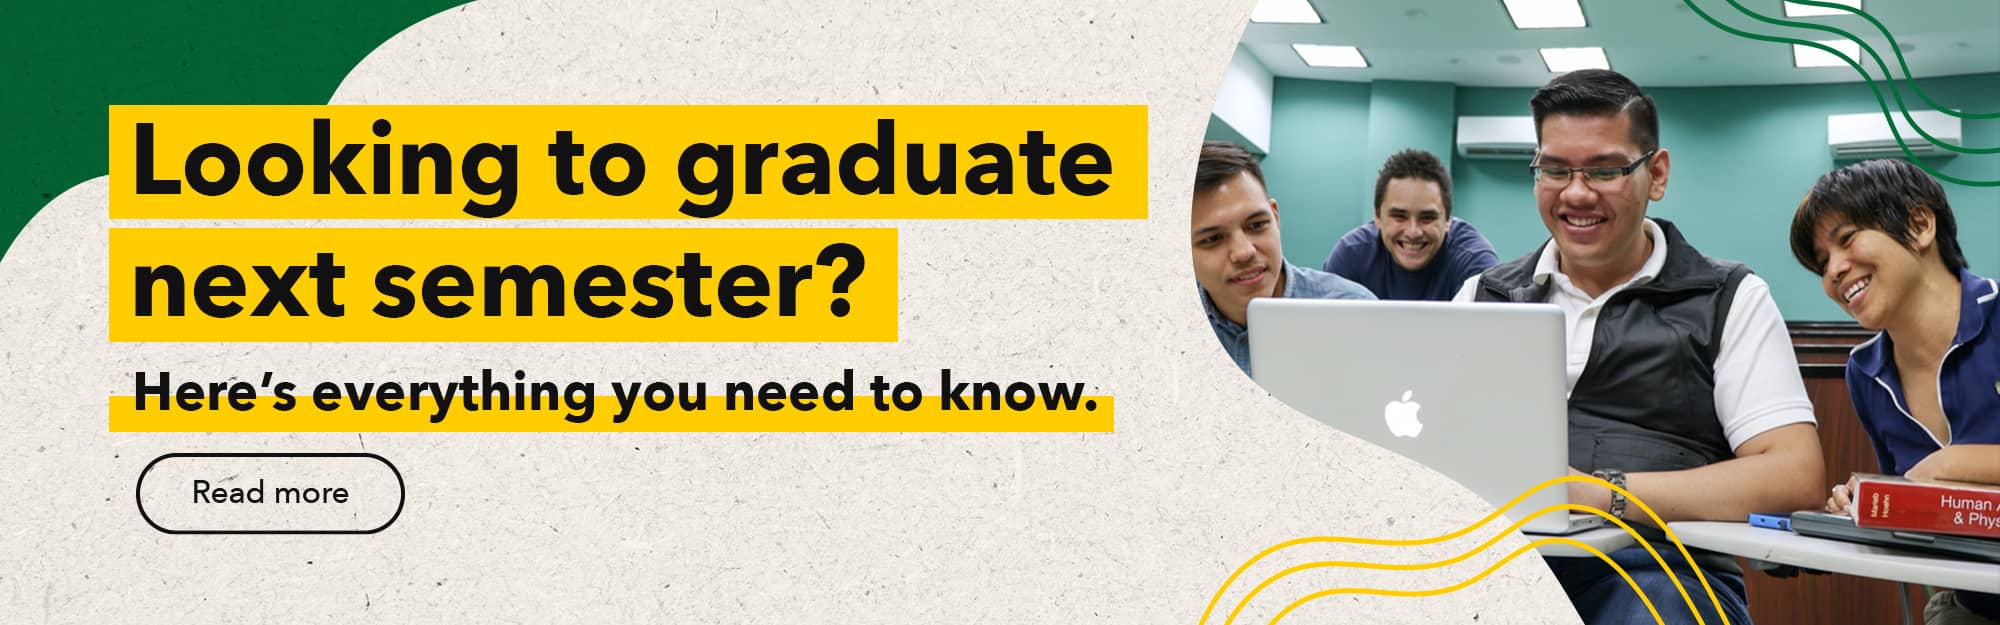 Looking to graduate next semester? Here’s everything you need to know.